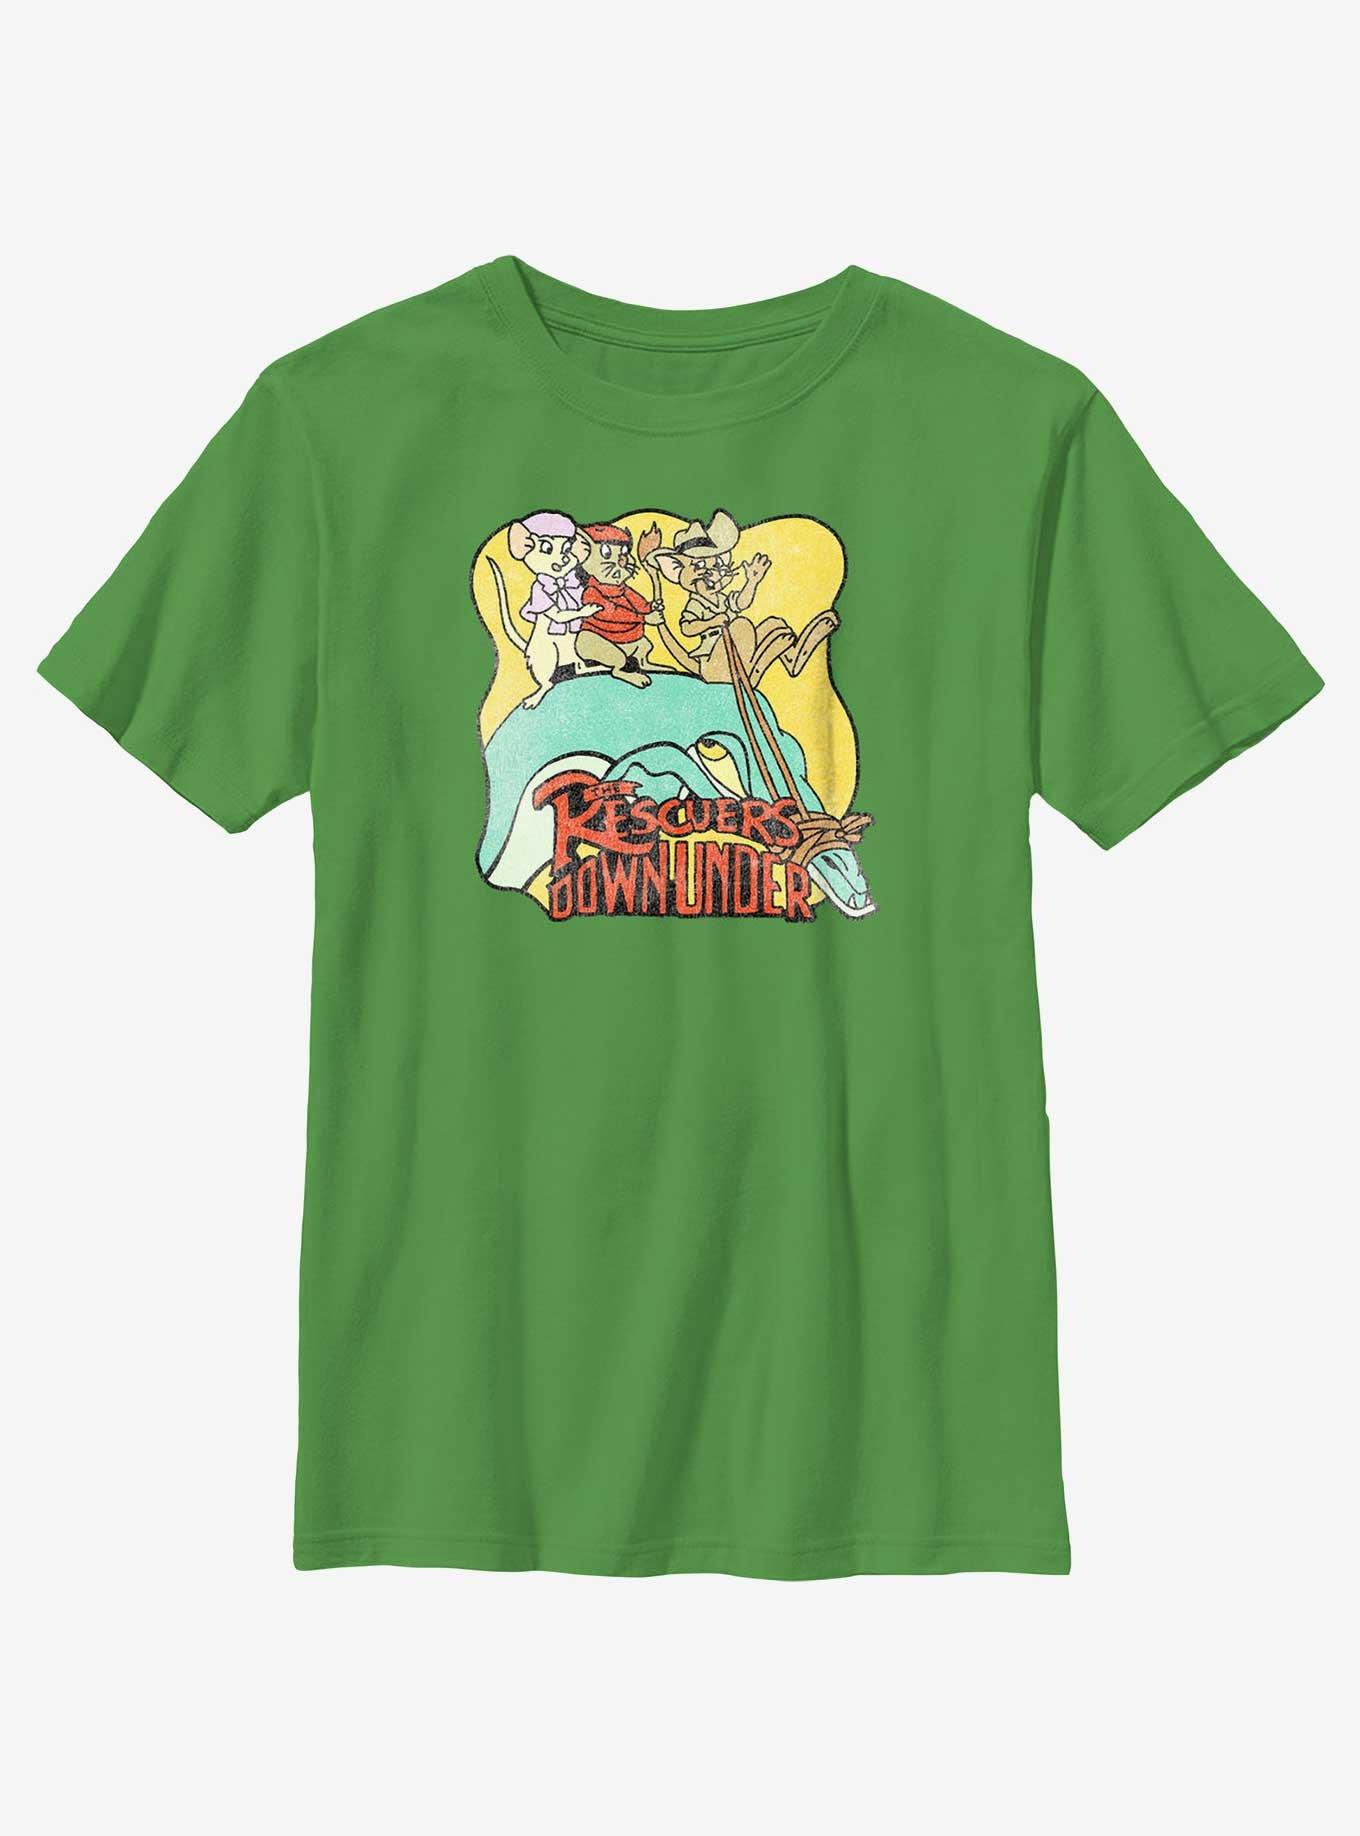 Disney The Rescuers Down Under Adventures With Jake Youth T-Shirt, KELLY, hi-res